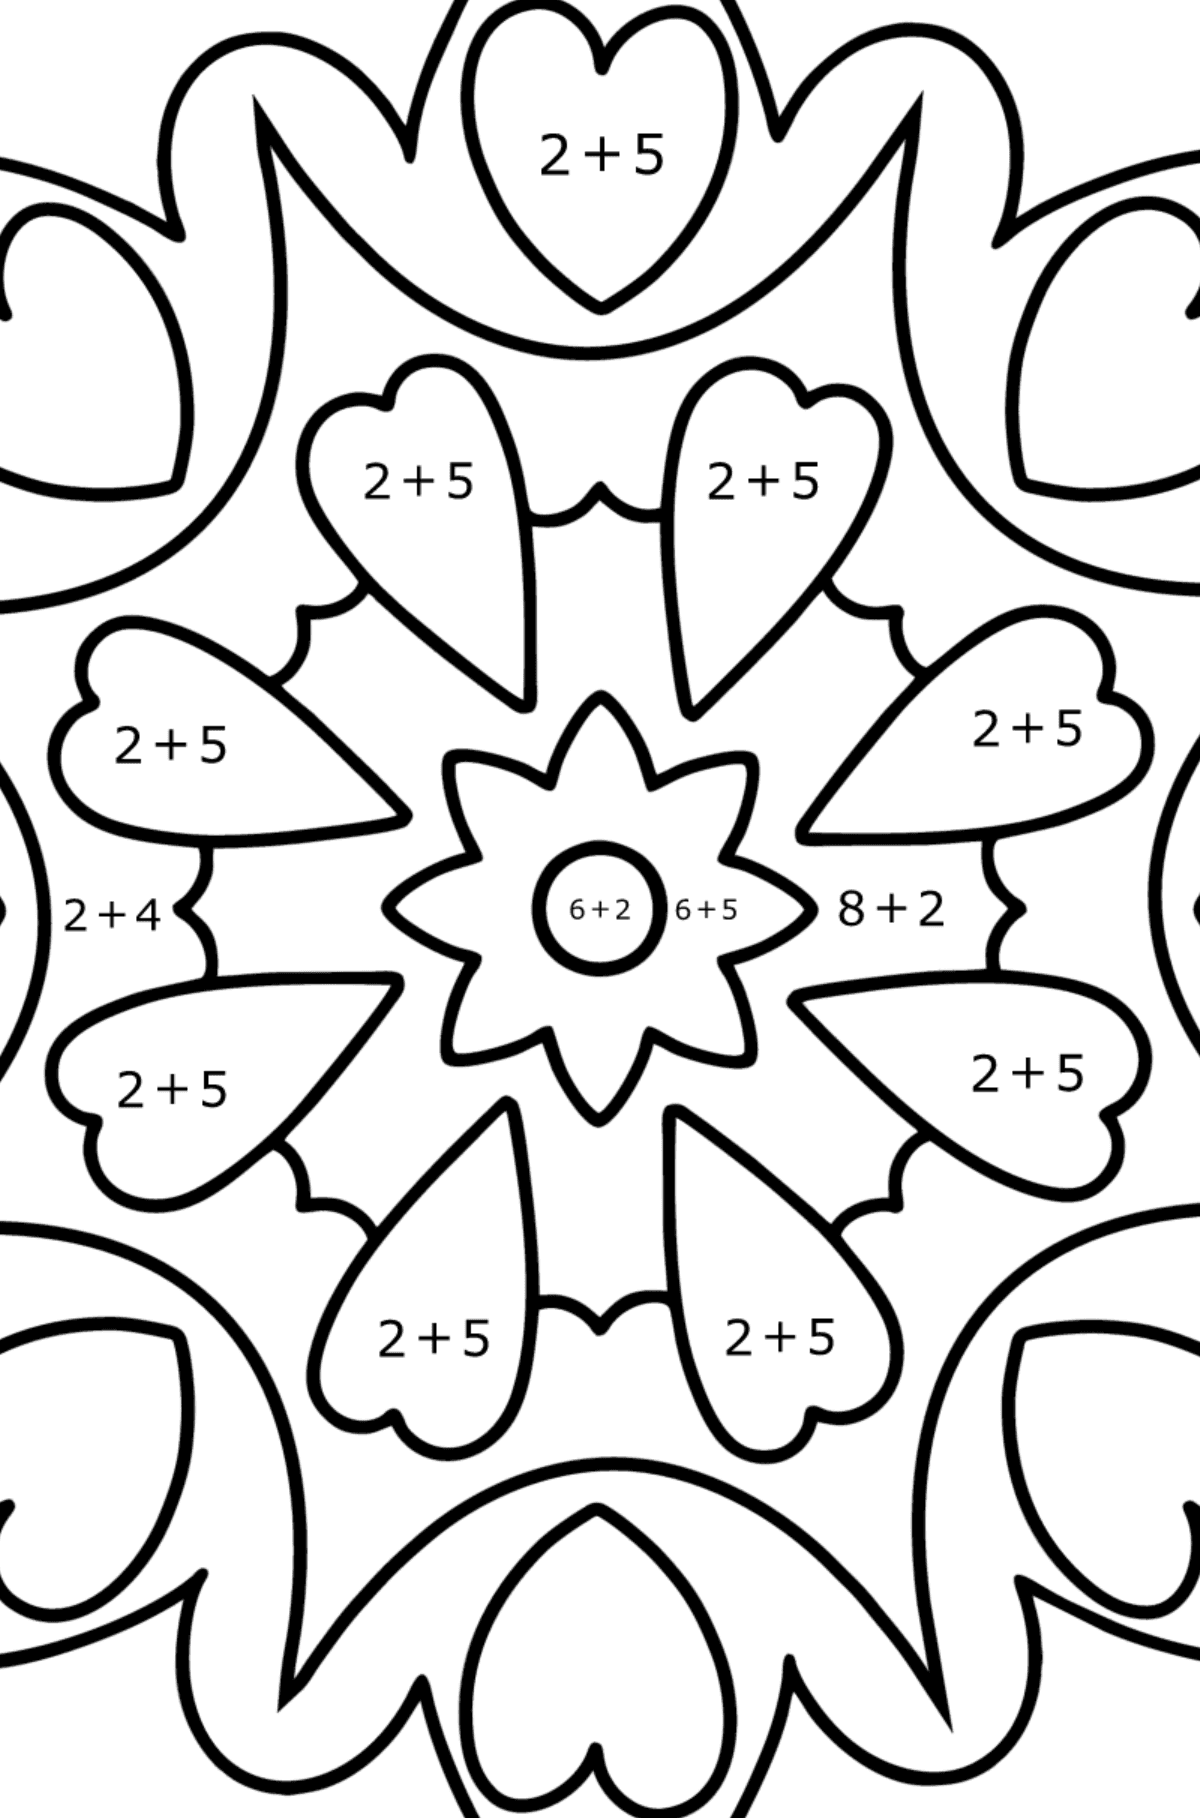 Mandala coloring page - 21 elements - Math Coloring - Addition for Kids